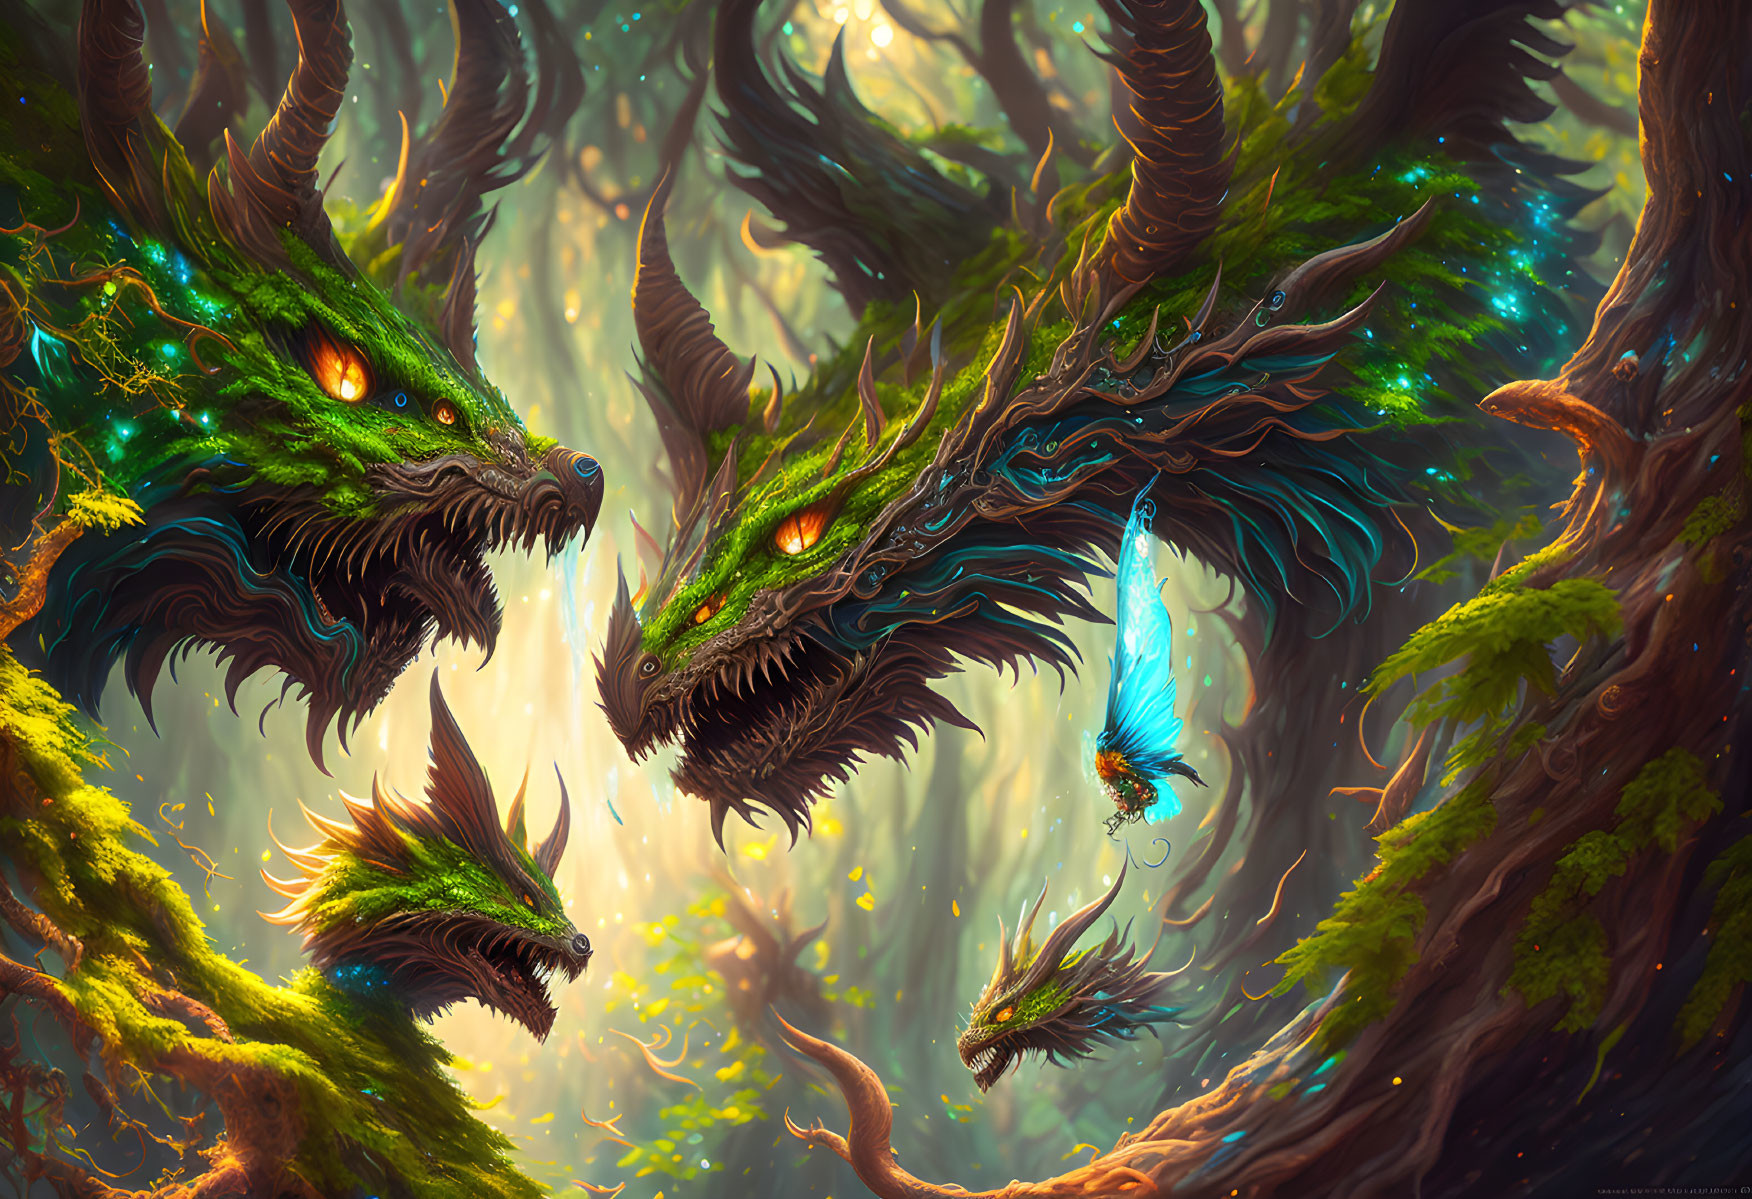 Multiple Green Dragons in Enchanted Forest with Glowing Eyes